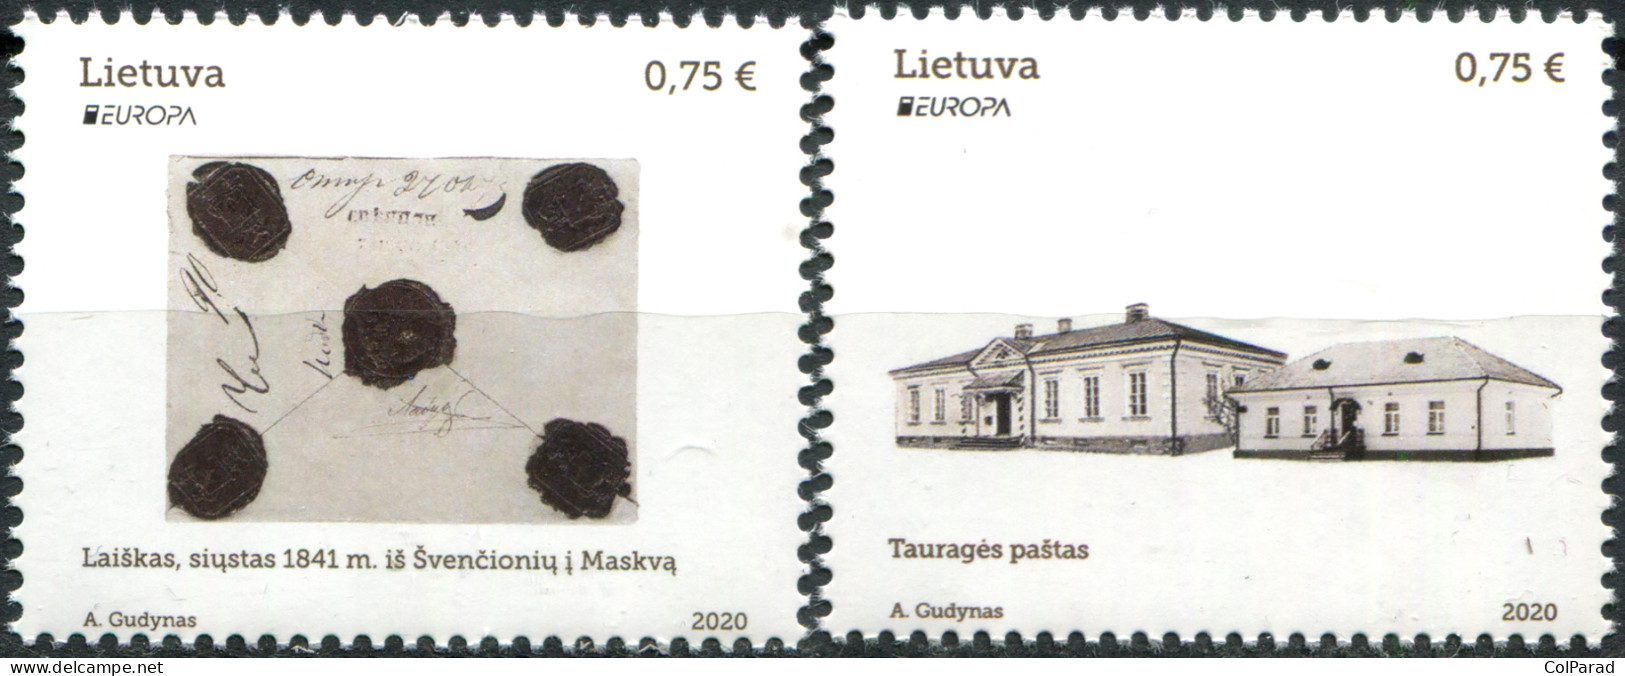 LITHUANIA - 2020 - SET OF 2 STAMPS MNH ** - Ancient Postal Routes - Lithuania